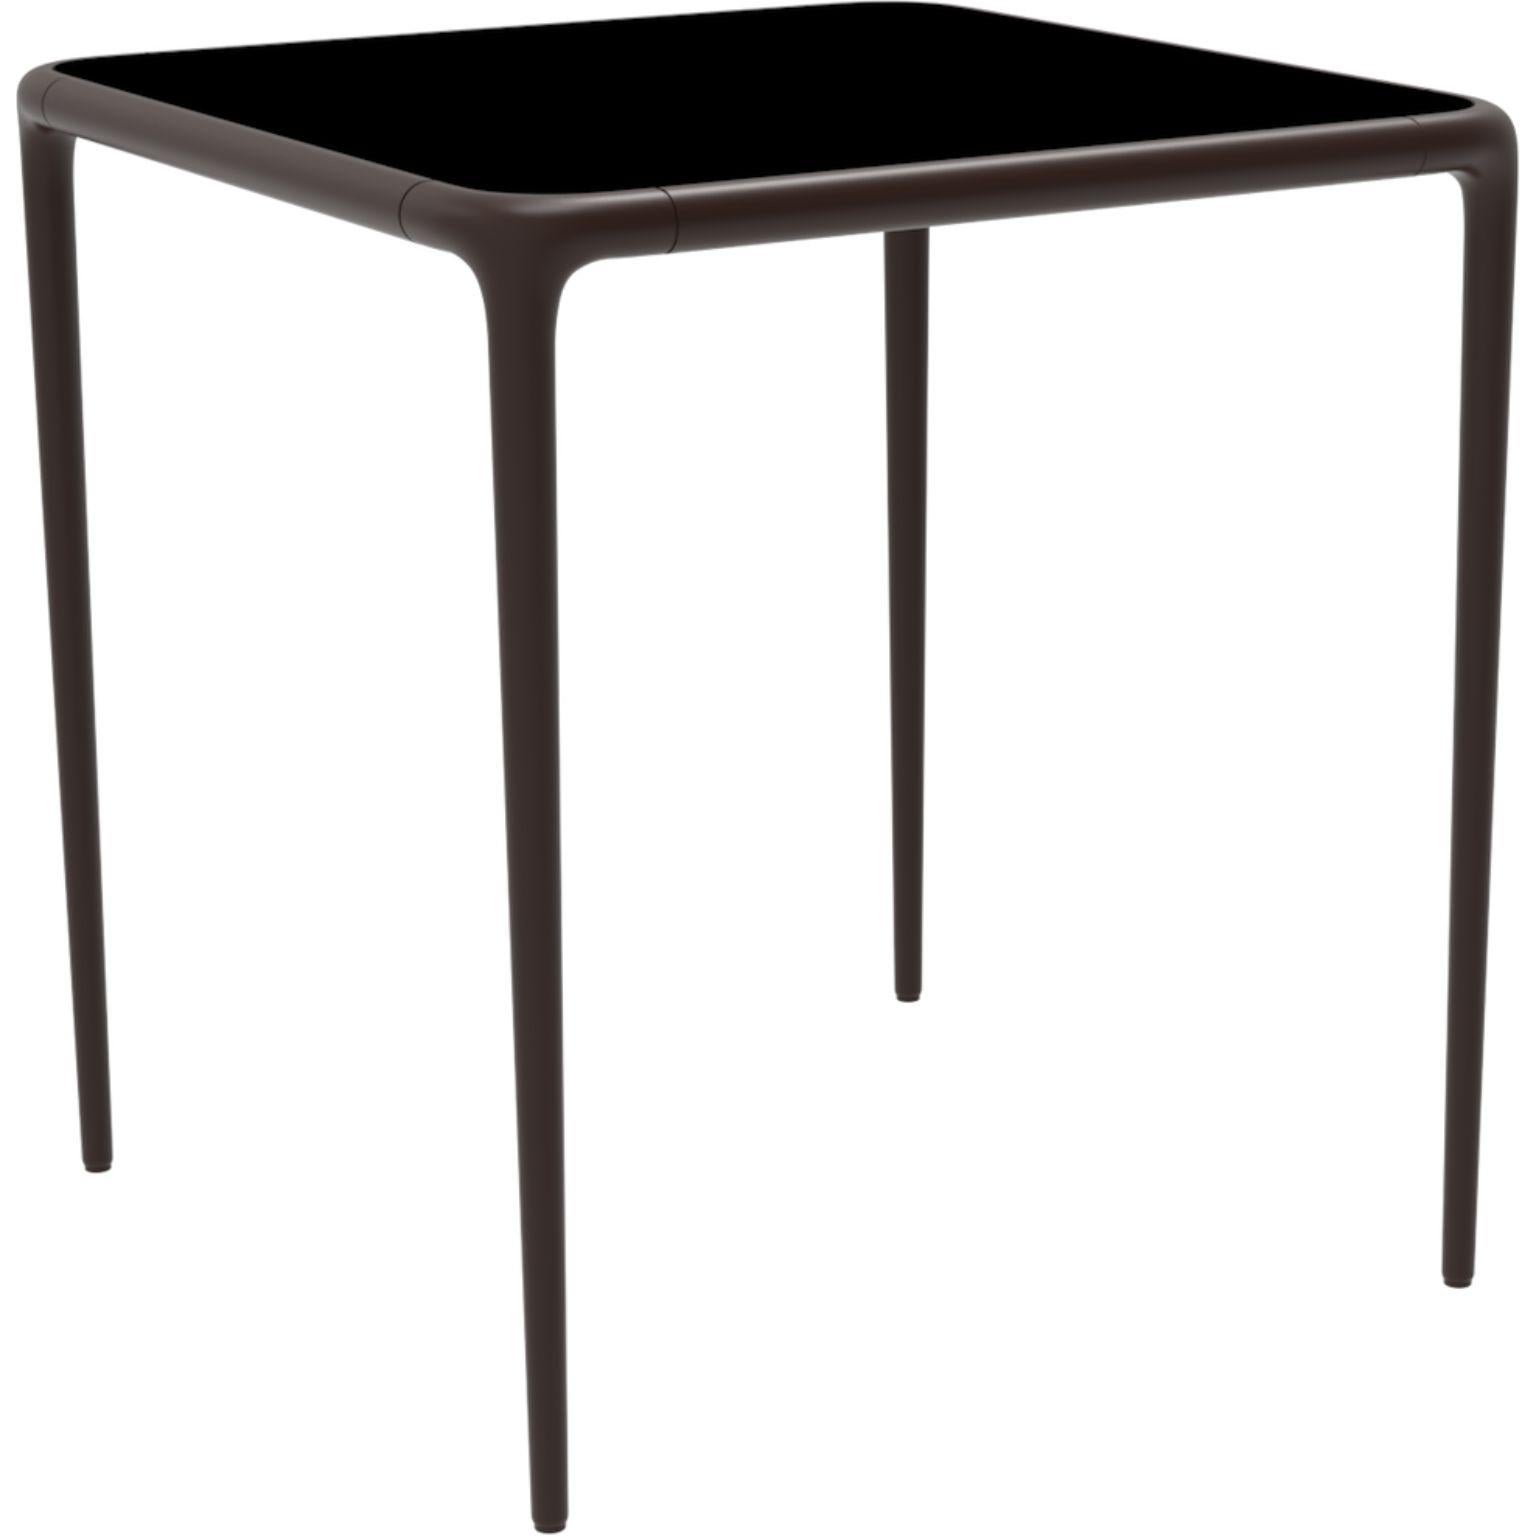 Xaloc chocolate glass top table 70 by Mowee
Dimensions: D 70 x W 70 x H 74 cm
Material: Aluminum, tinted tempered glass top.
Also available in different aluminum colors and finishes (HPL Black Edge or Neolith)

Xaloc synthesizes the lines of